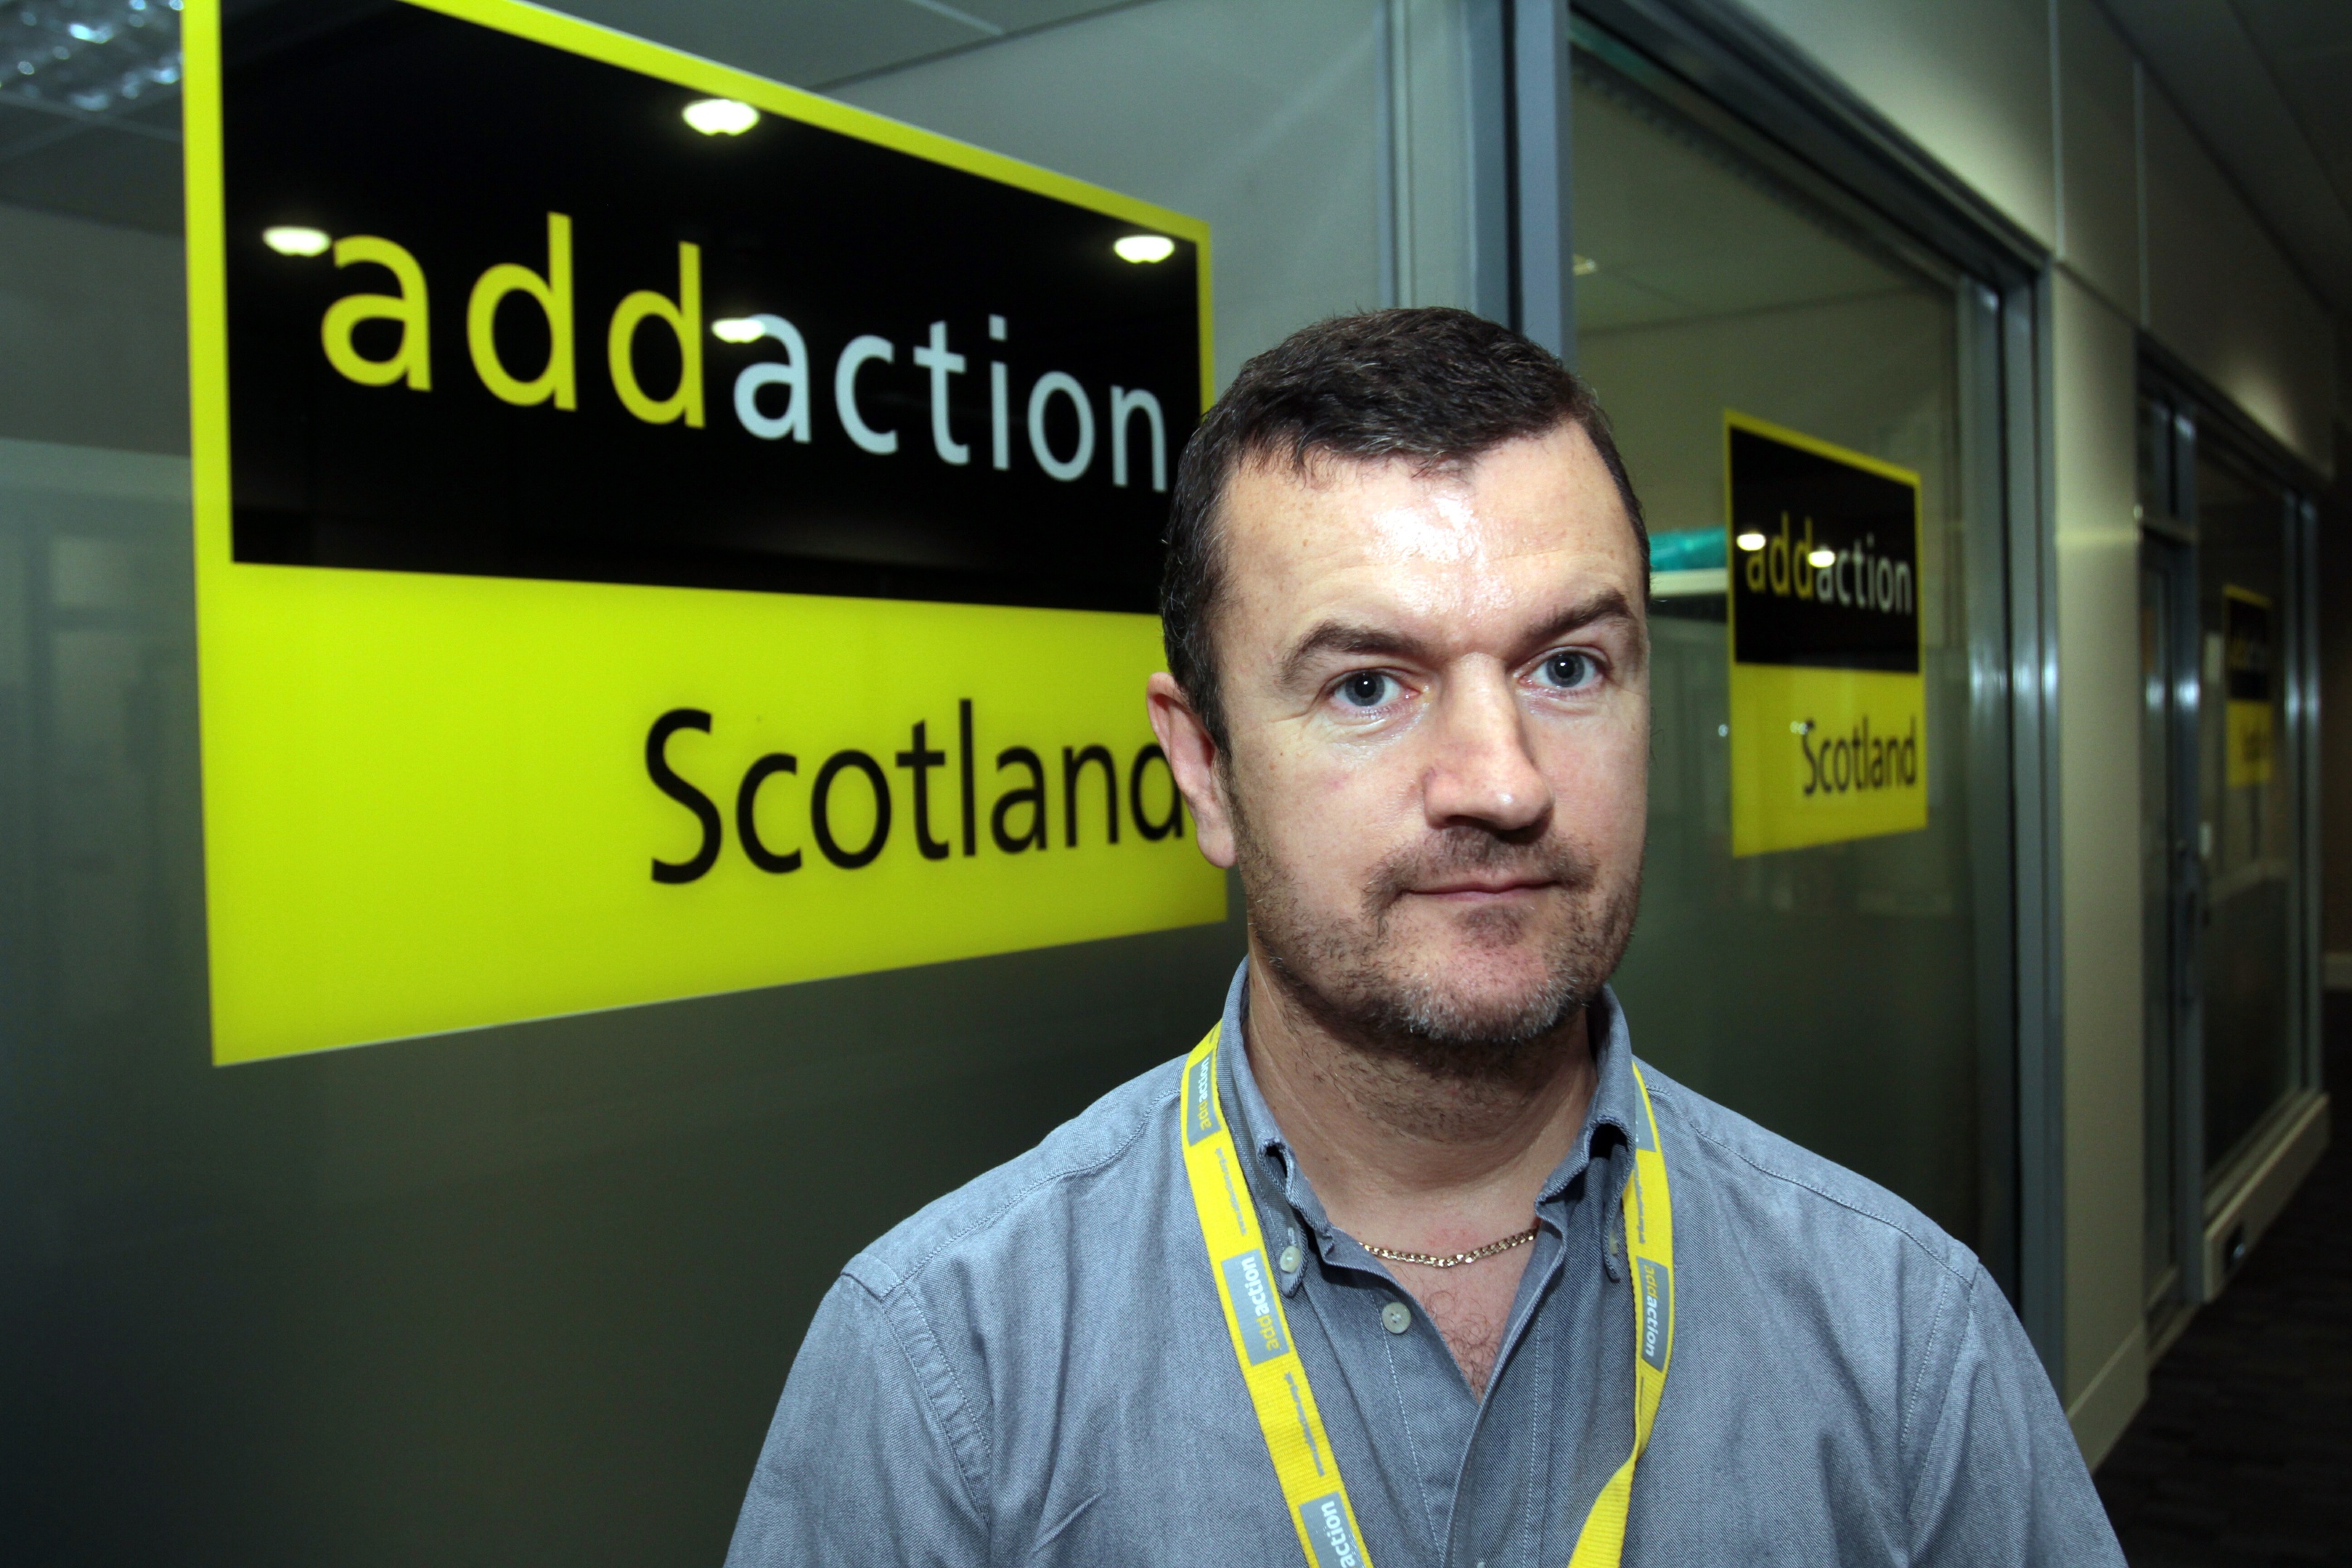 Dave Barrie, of Addaction Scotland